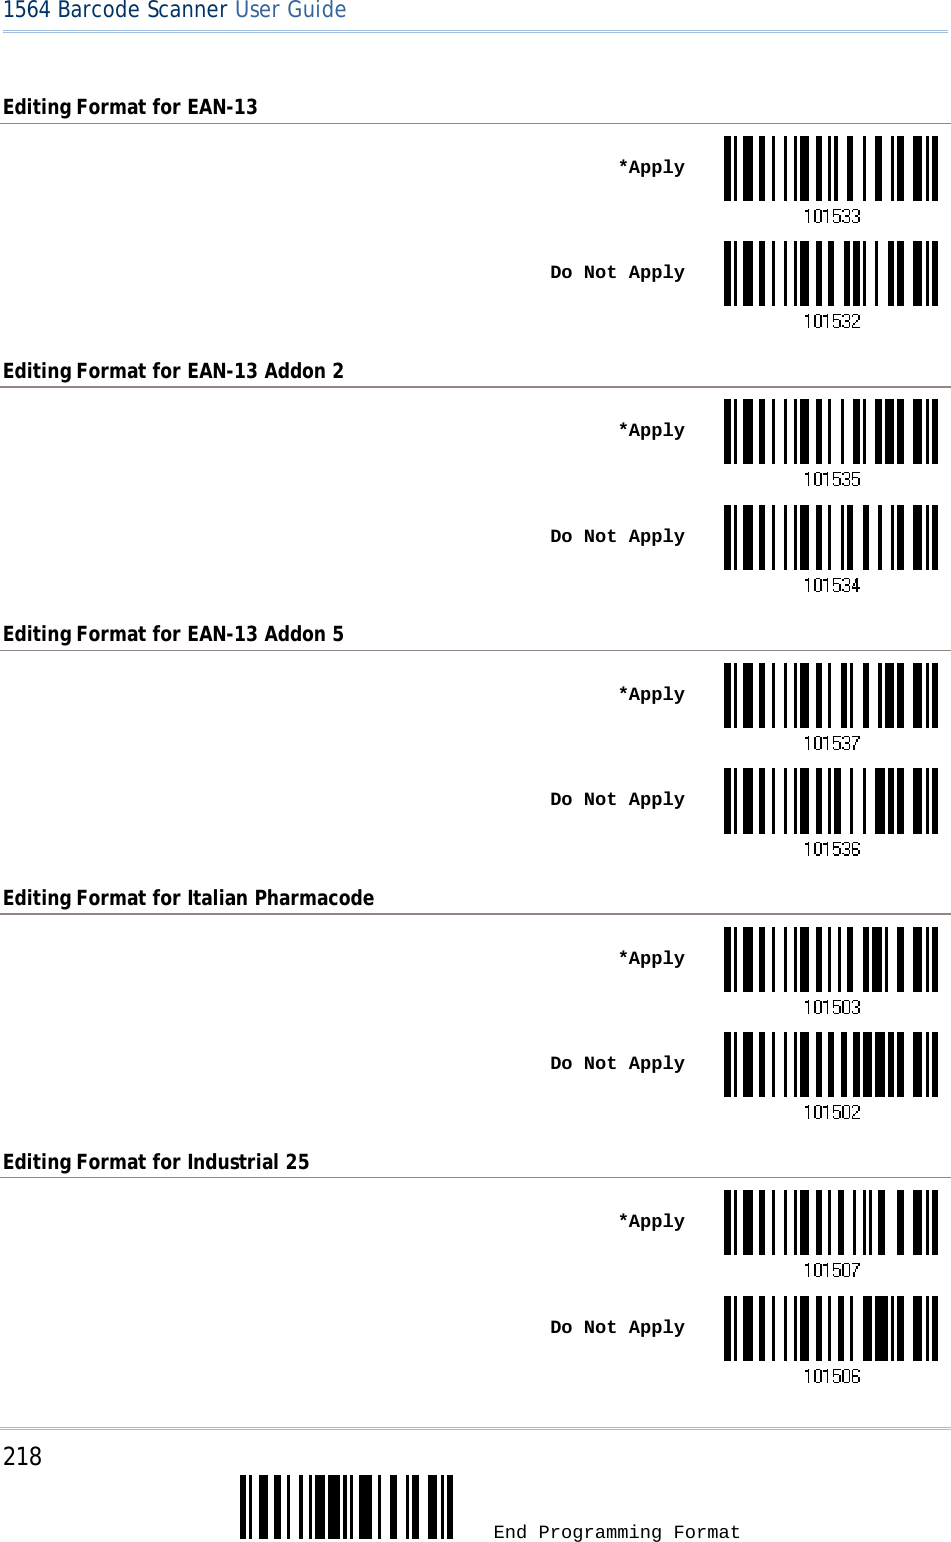 218  End Programming Format 1564 Barcode Scanner User Guide  Editing Format for EAN-13  *Apply Do Not ApplyEditing Format for EAN-13 Addon 2  *Apply Do Not ApplyEditing Format for EAN-13 Addon 5  *Apply Do Not ApplyEditing Format for Italian Pharmacode  *Apply Do Not ApplyEditing Format for Industrial 25  *Apply Do Not Apply